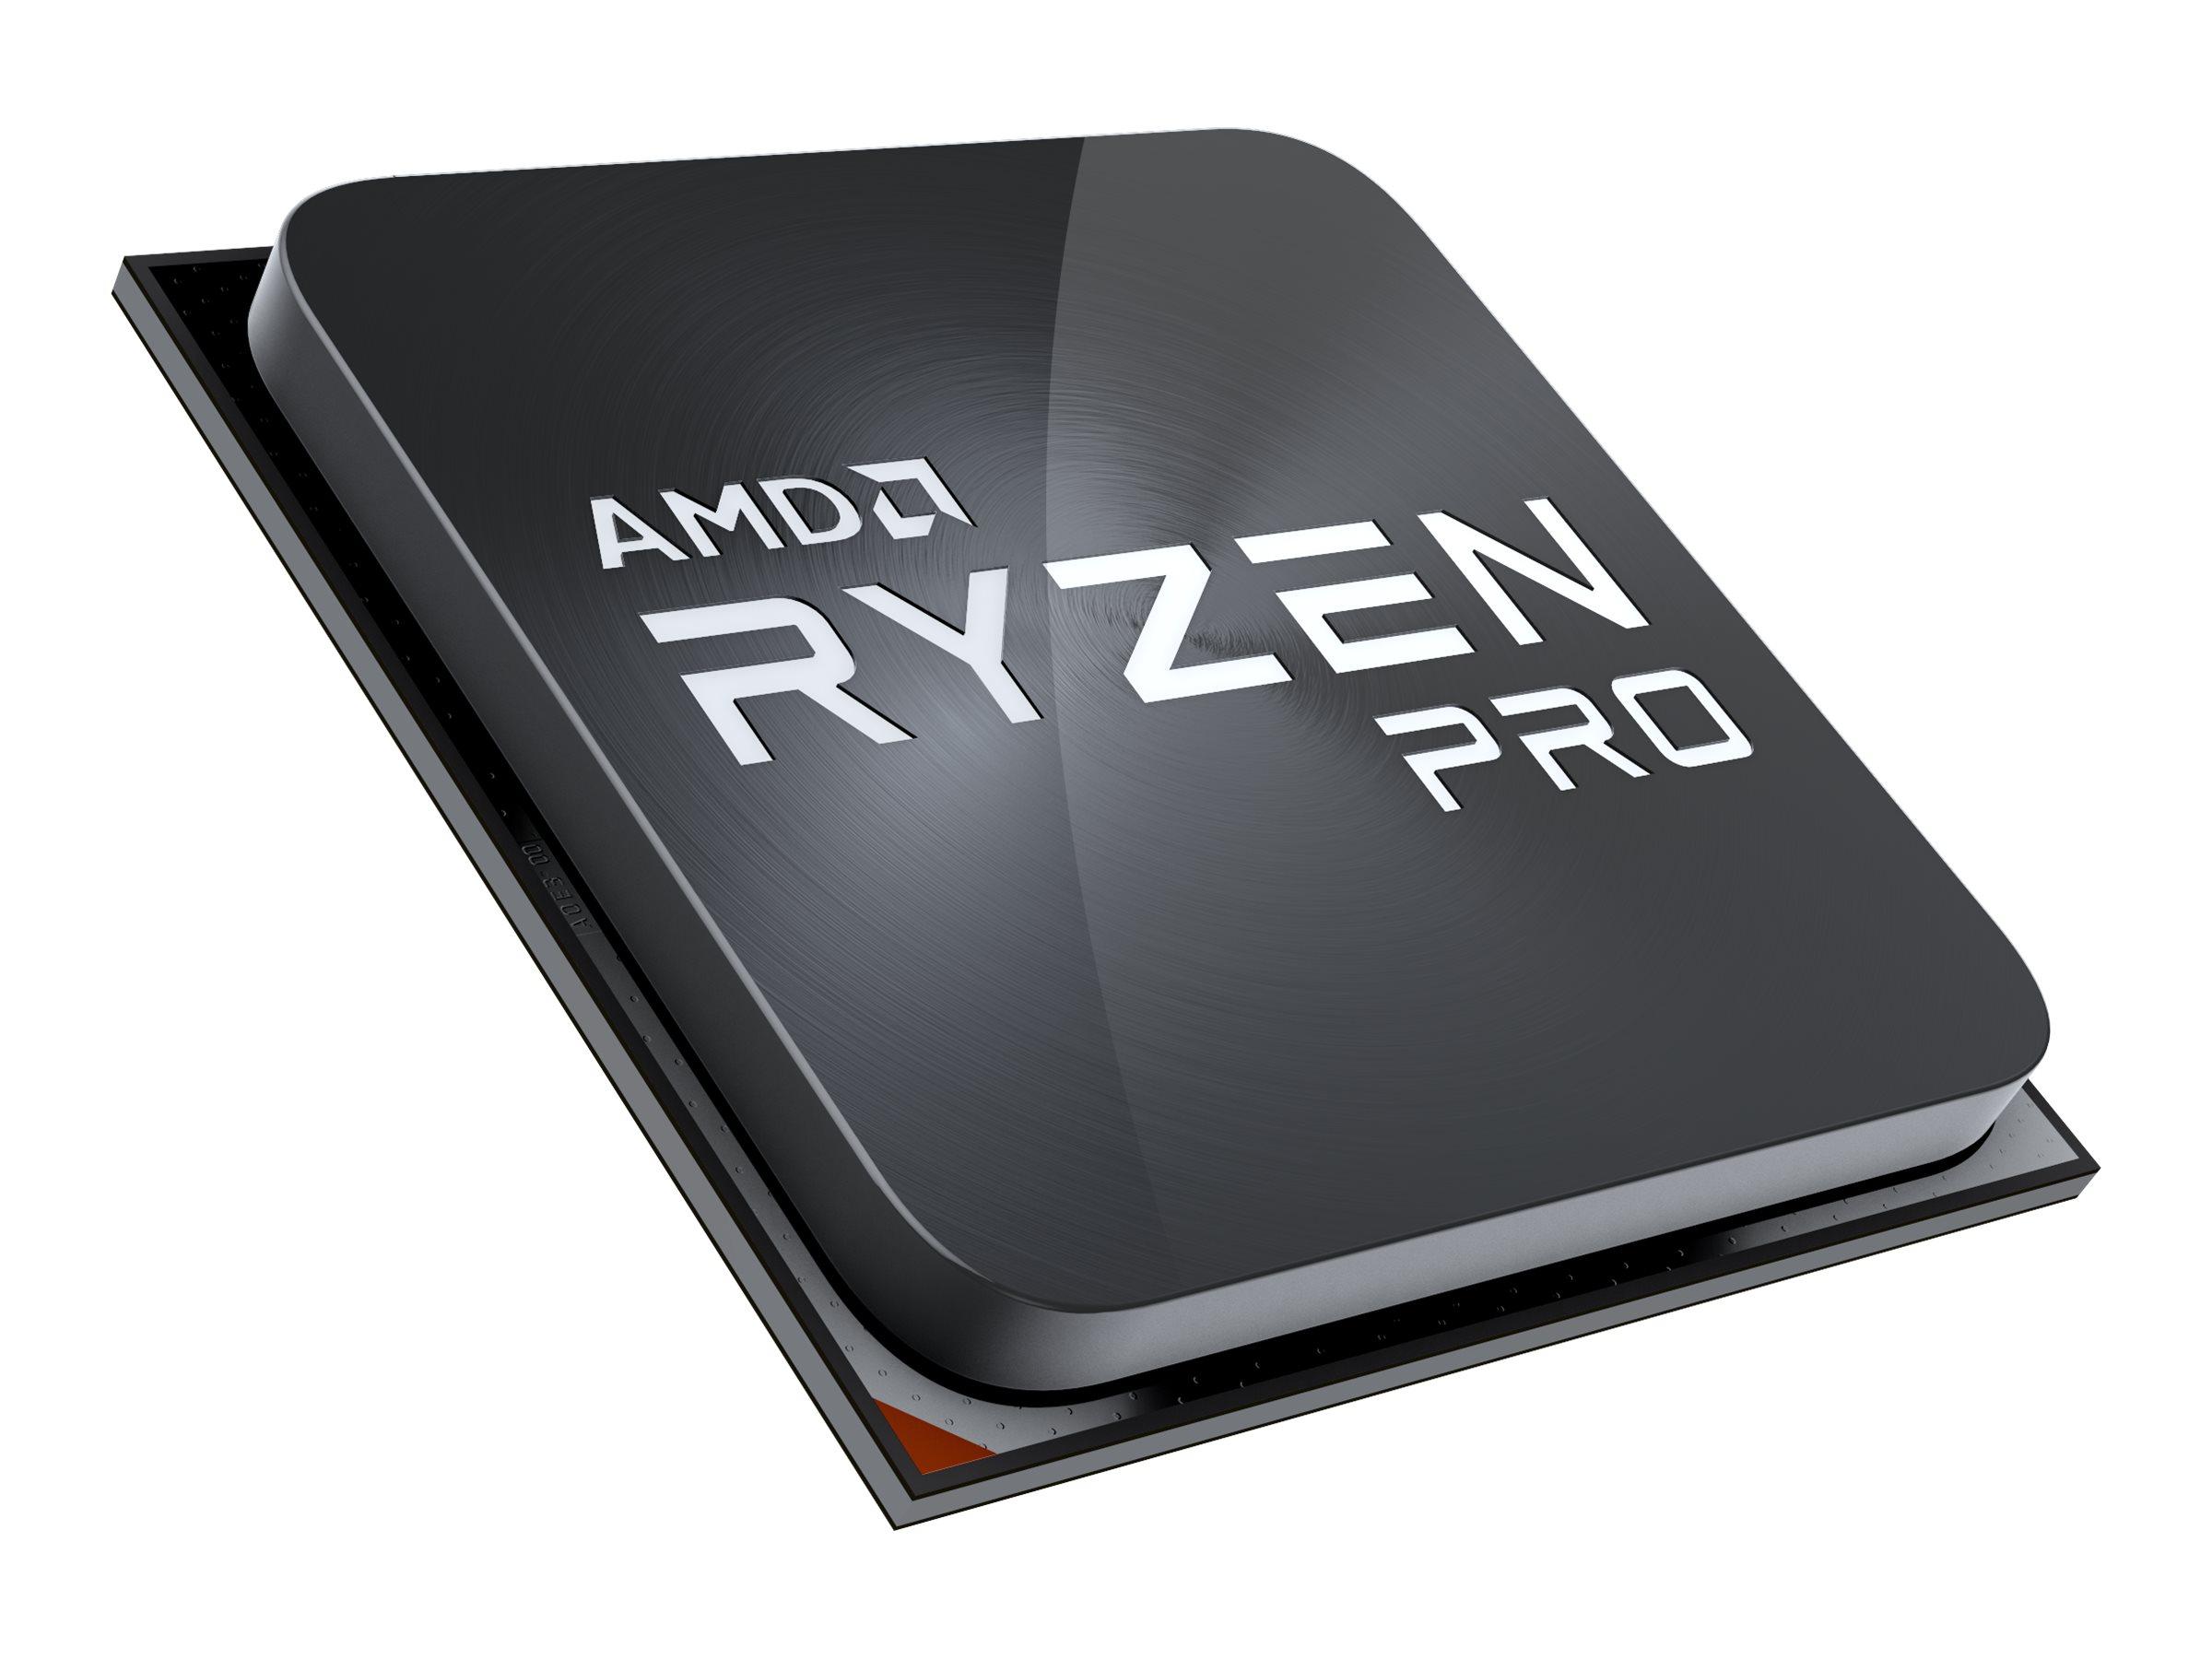 Процесор AMD RYZEN 5 PRO 5650G TRAY (6C/12T, 16MB 3.9 GHz (up to 4.4 GHz) with Radeon Graphics, AM4, 65W